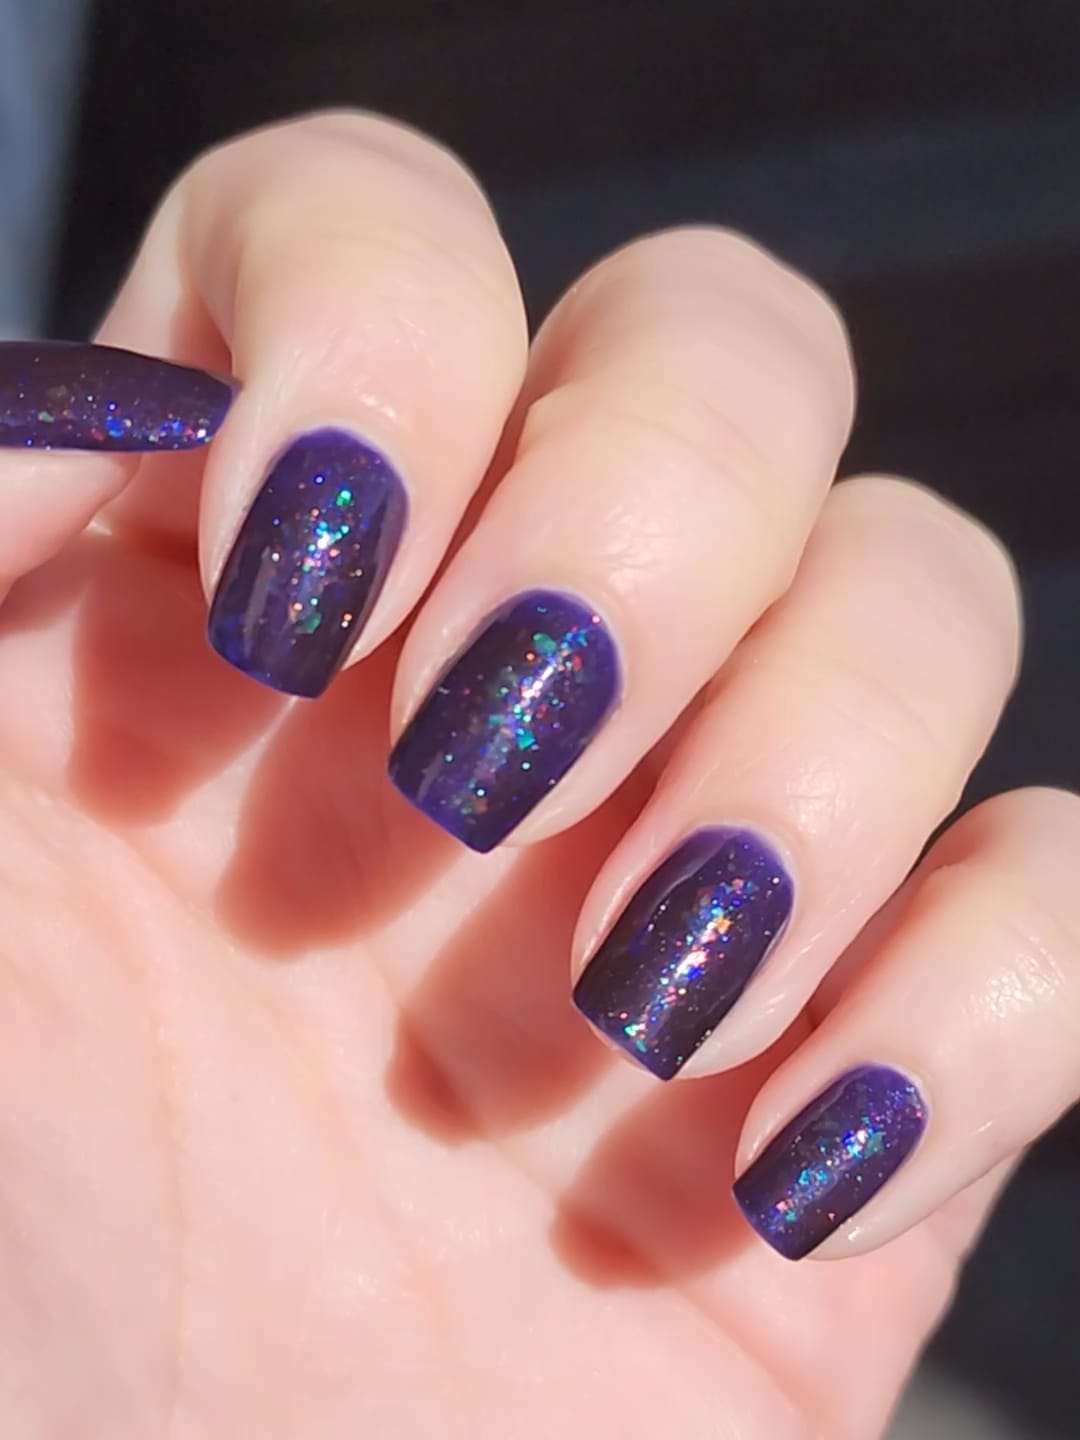 Intergalactic - dark blue/purple with all the UP (og 'unicorn pee') flakies and shimmers